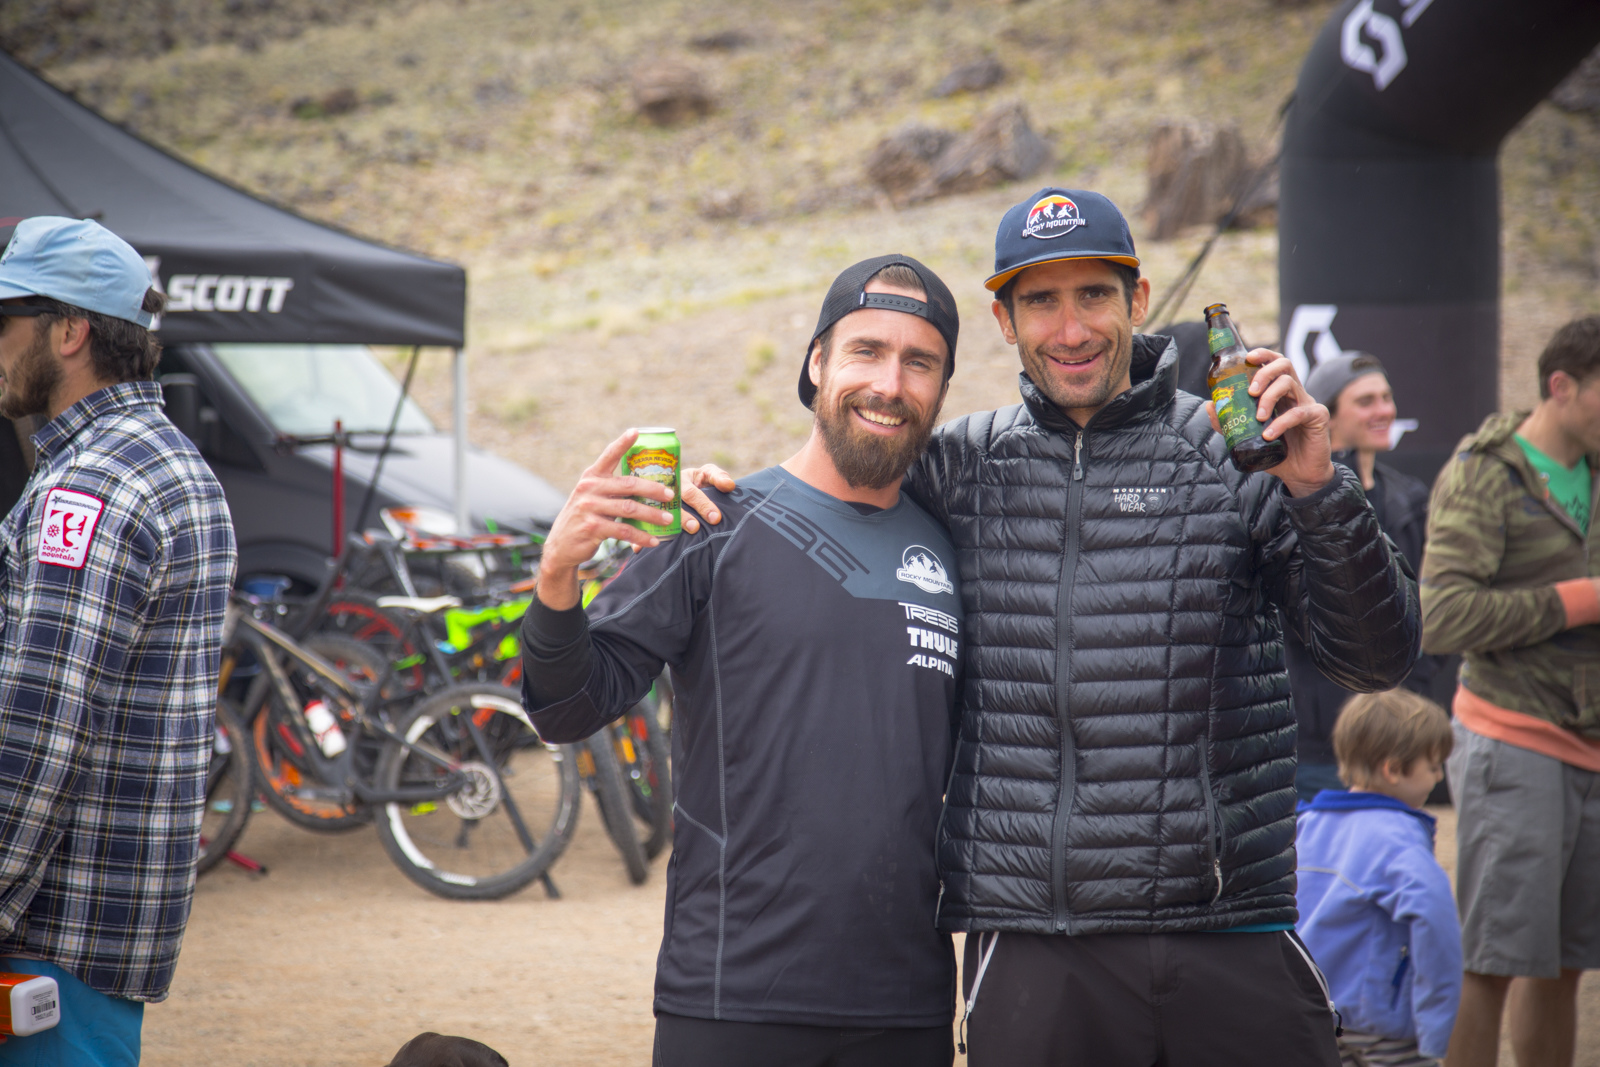 Riders and Sierra Nevada Brewing at the 2016 SCOTT Enduro Cup presented by Vittoria in Moab, Utah